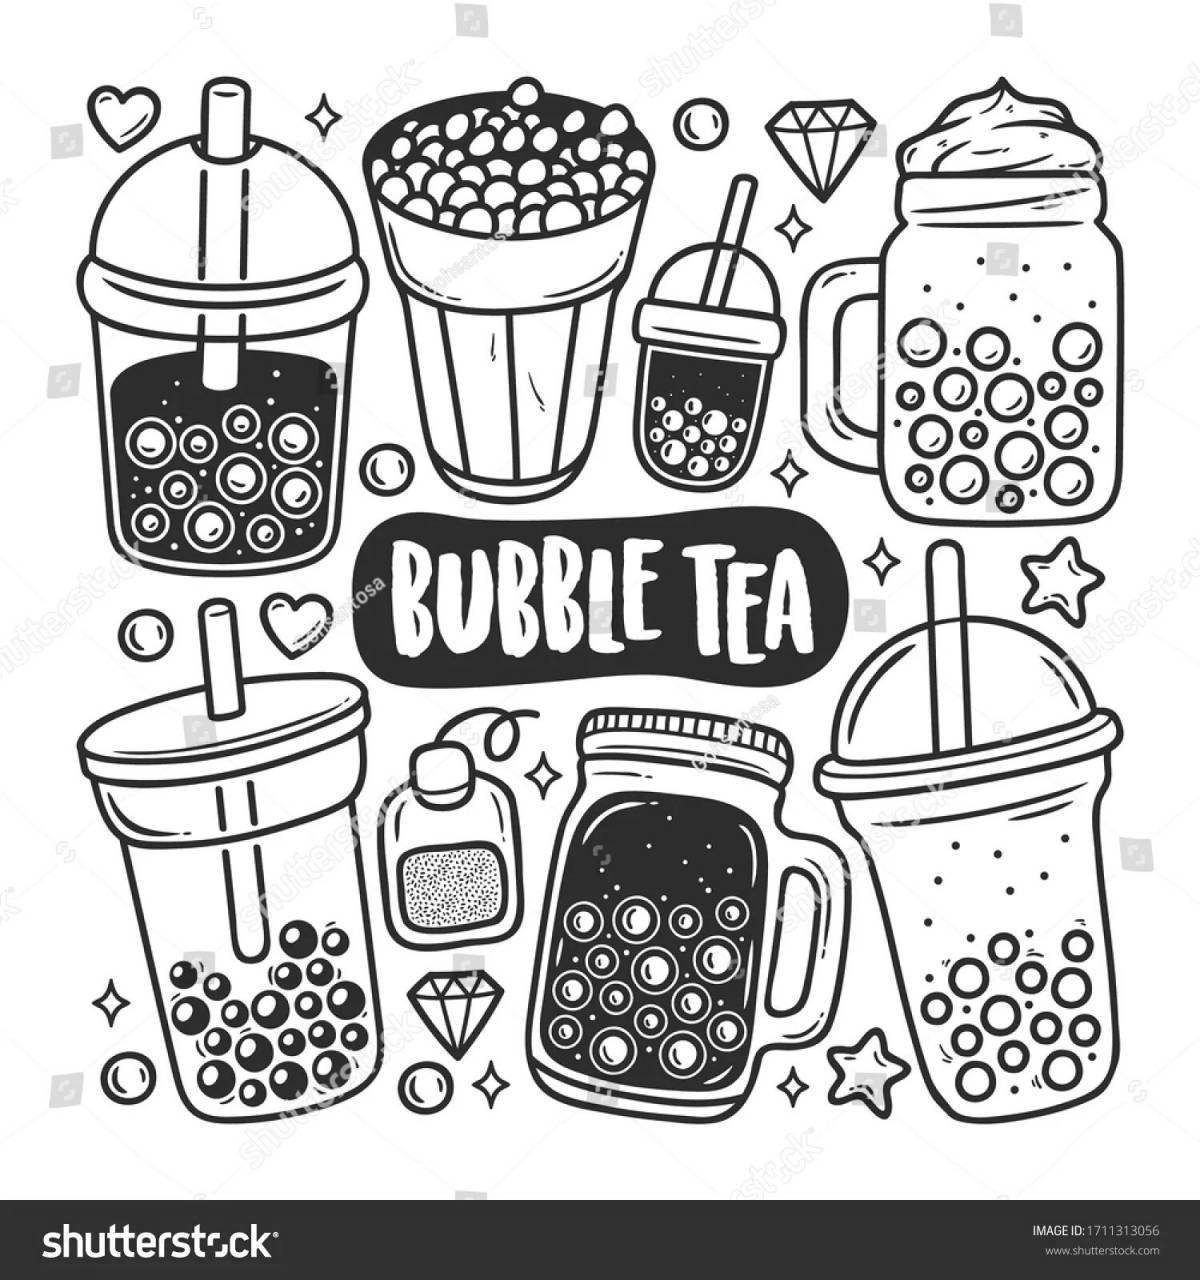 Coloring page unusual bubble kvass